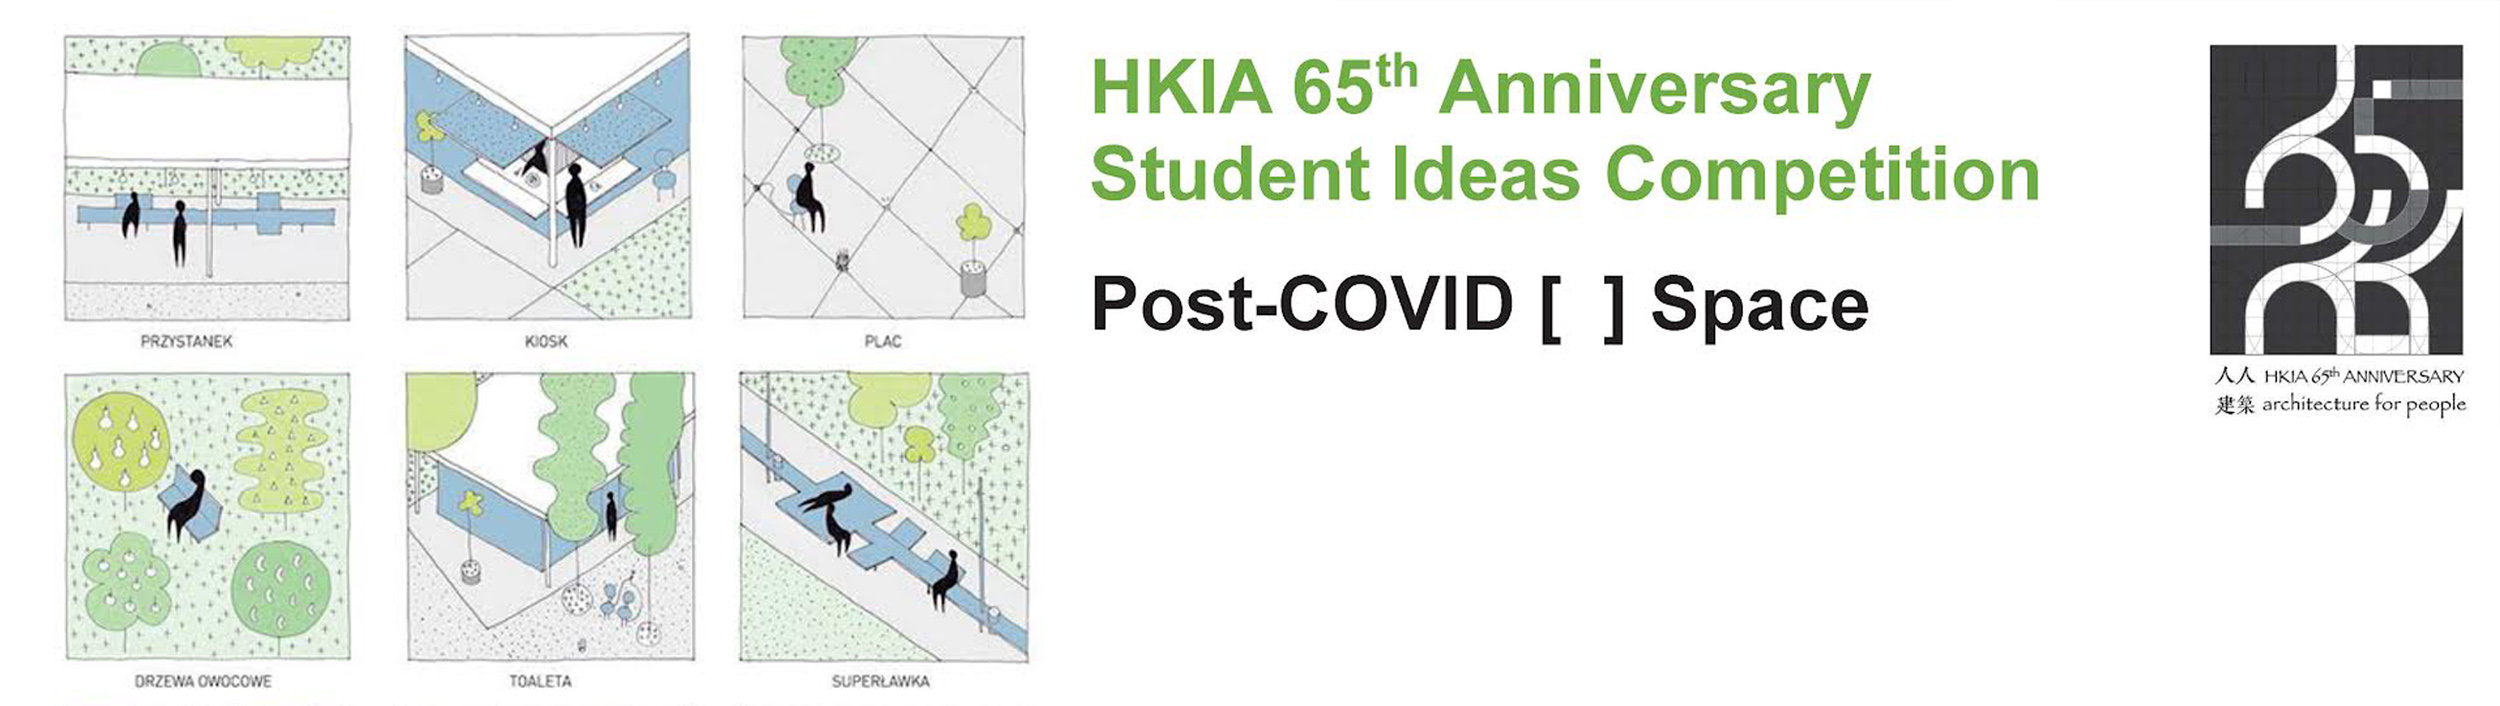 HKIA 65th Anniversary Student Ideas Competition